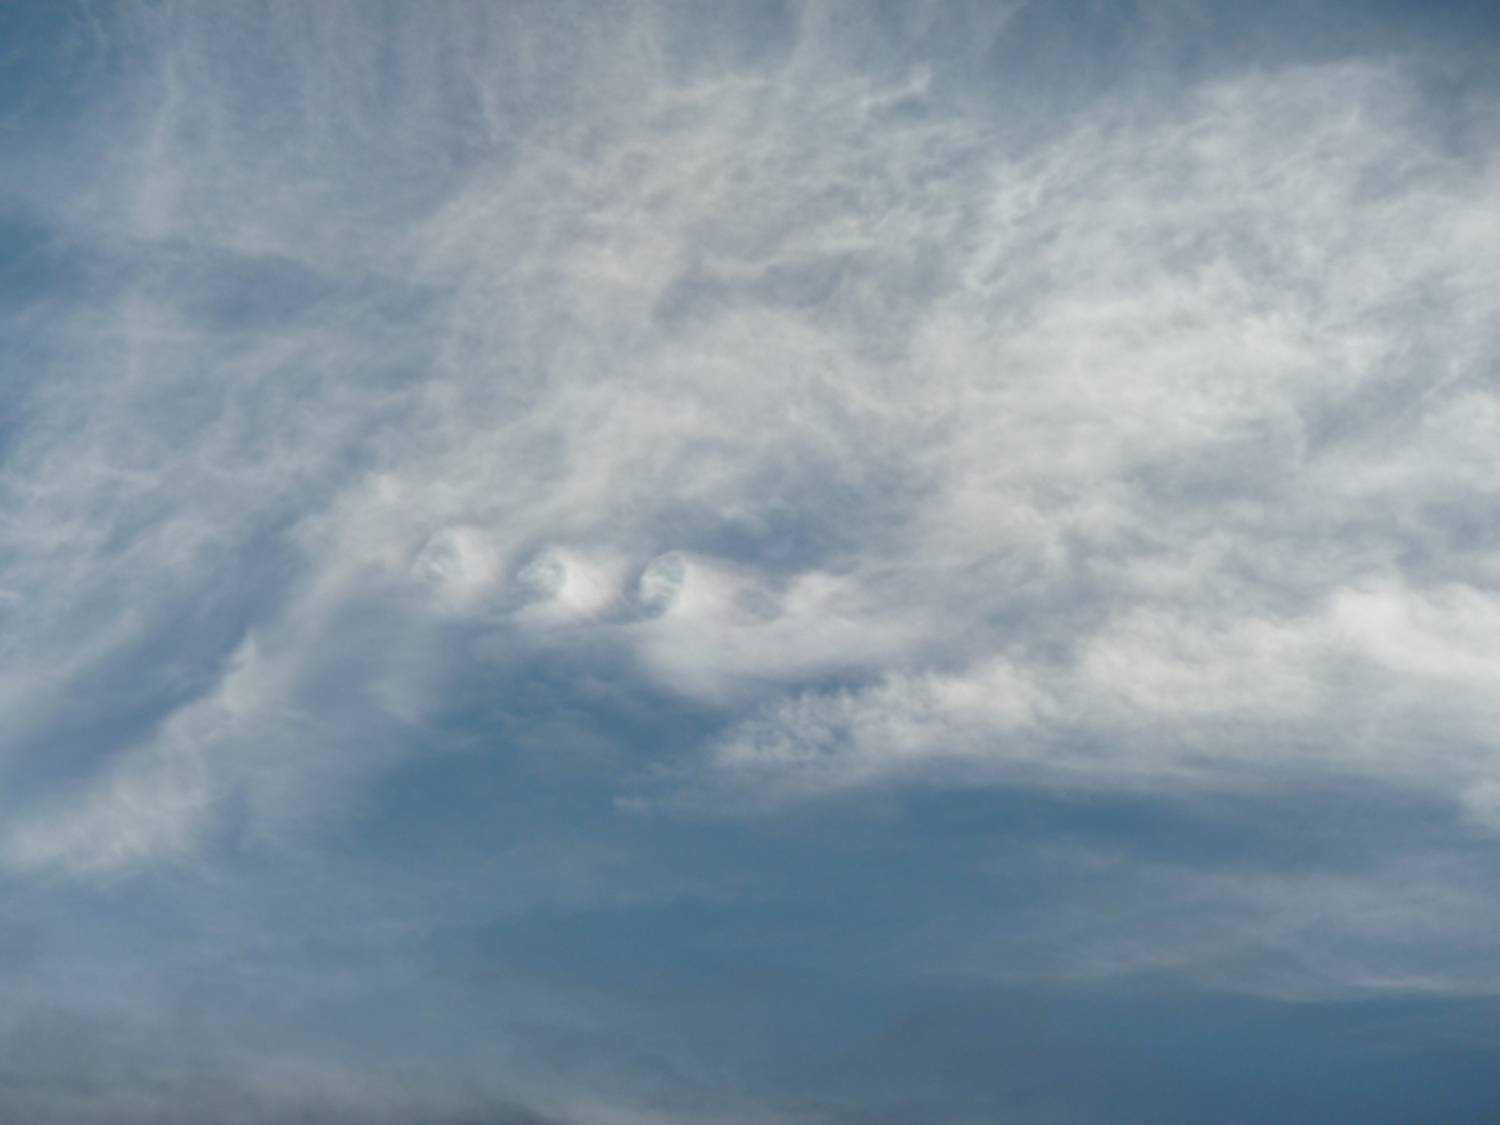 Cloud over Milan: 62 KB; click on the image to enlarge